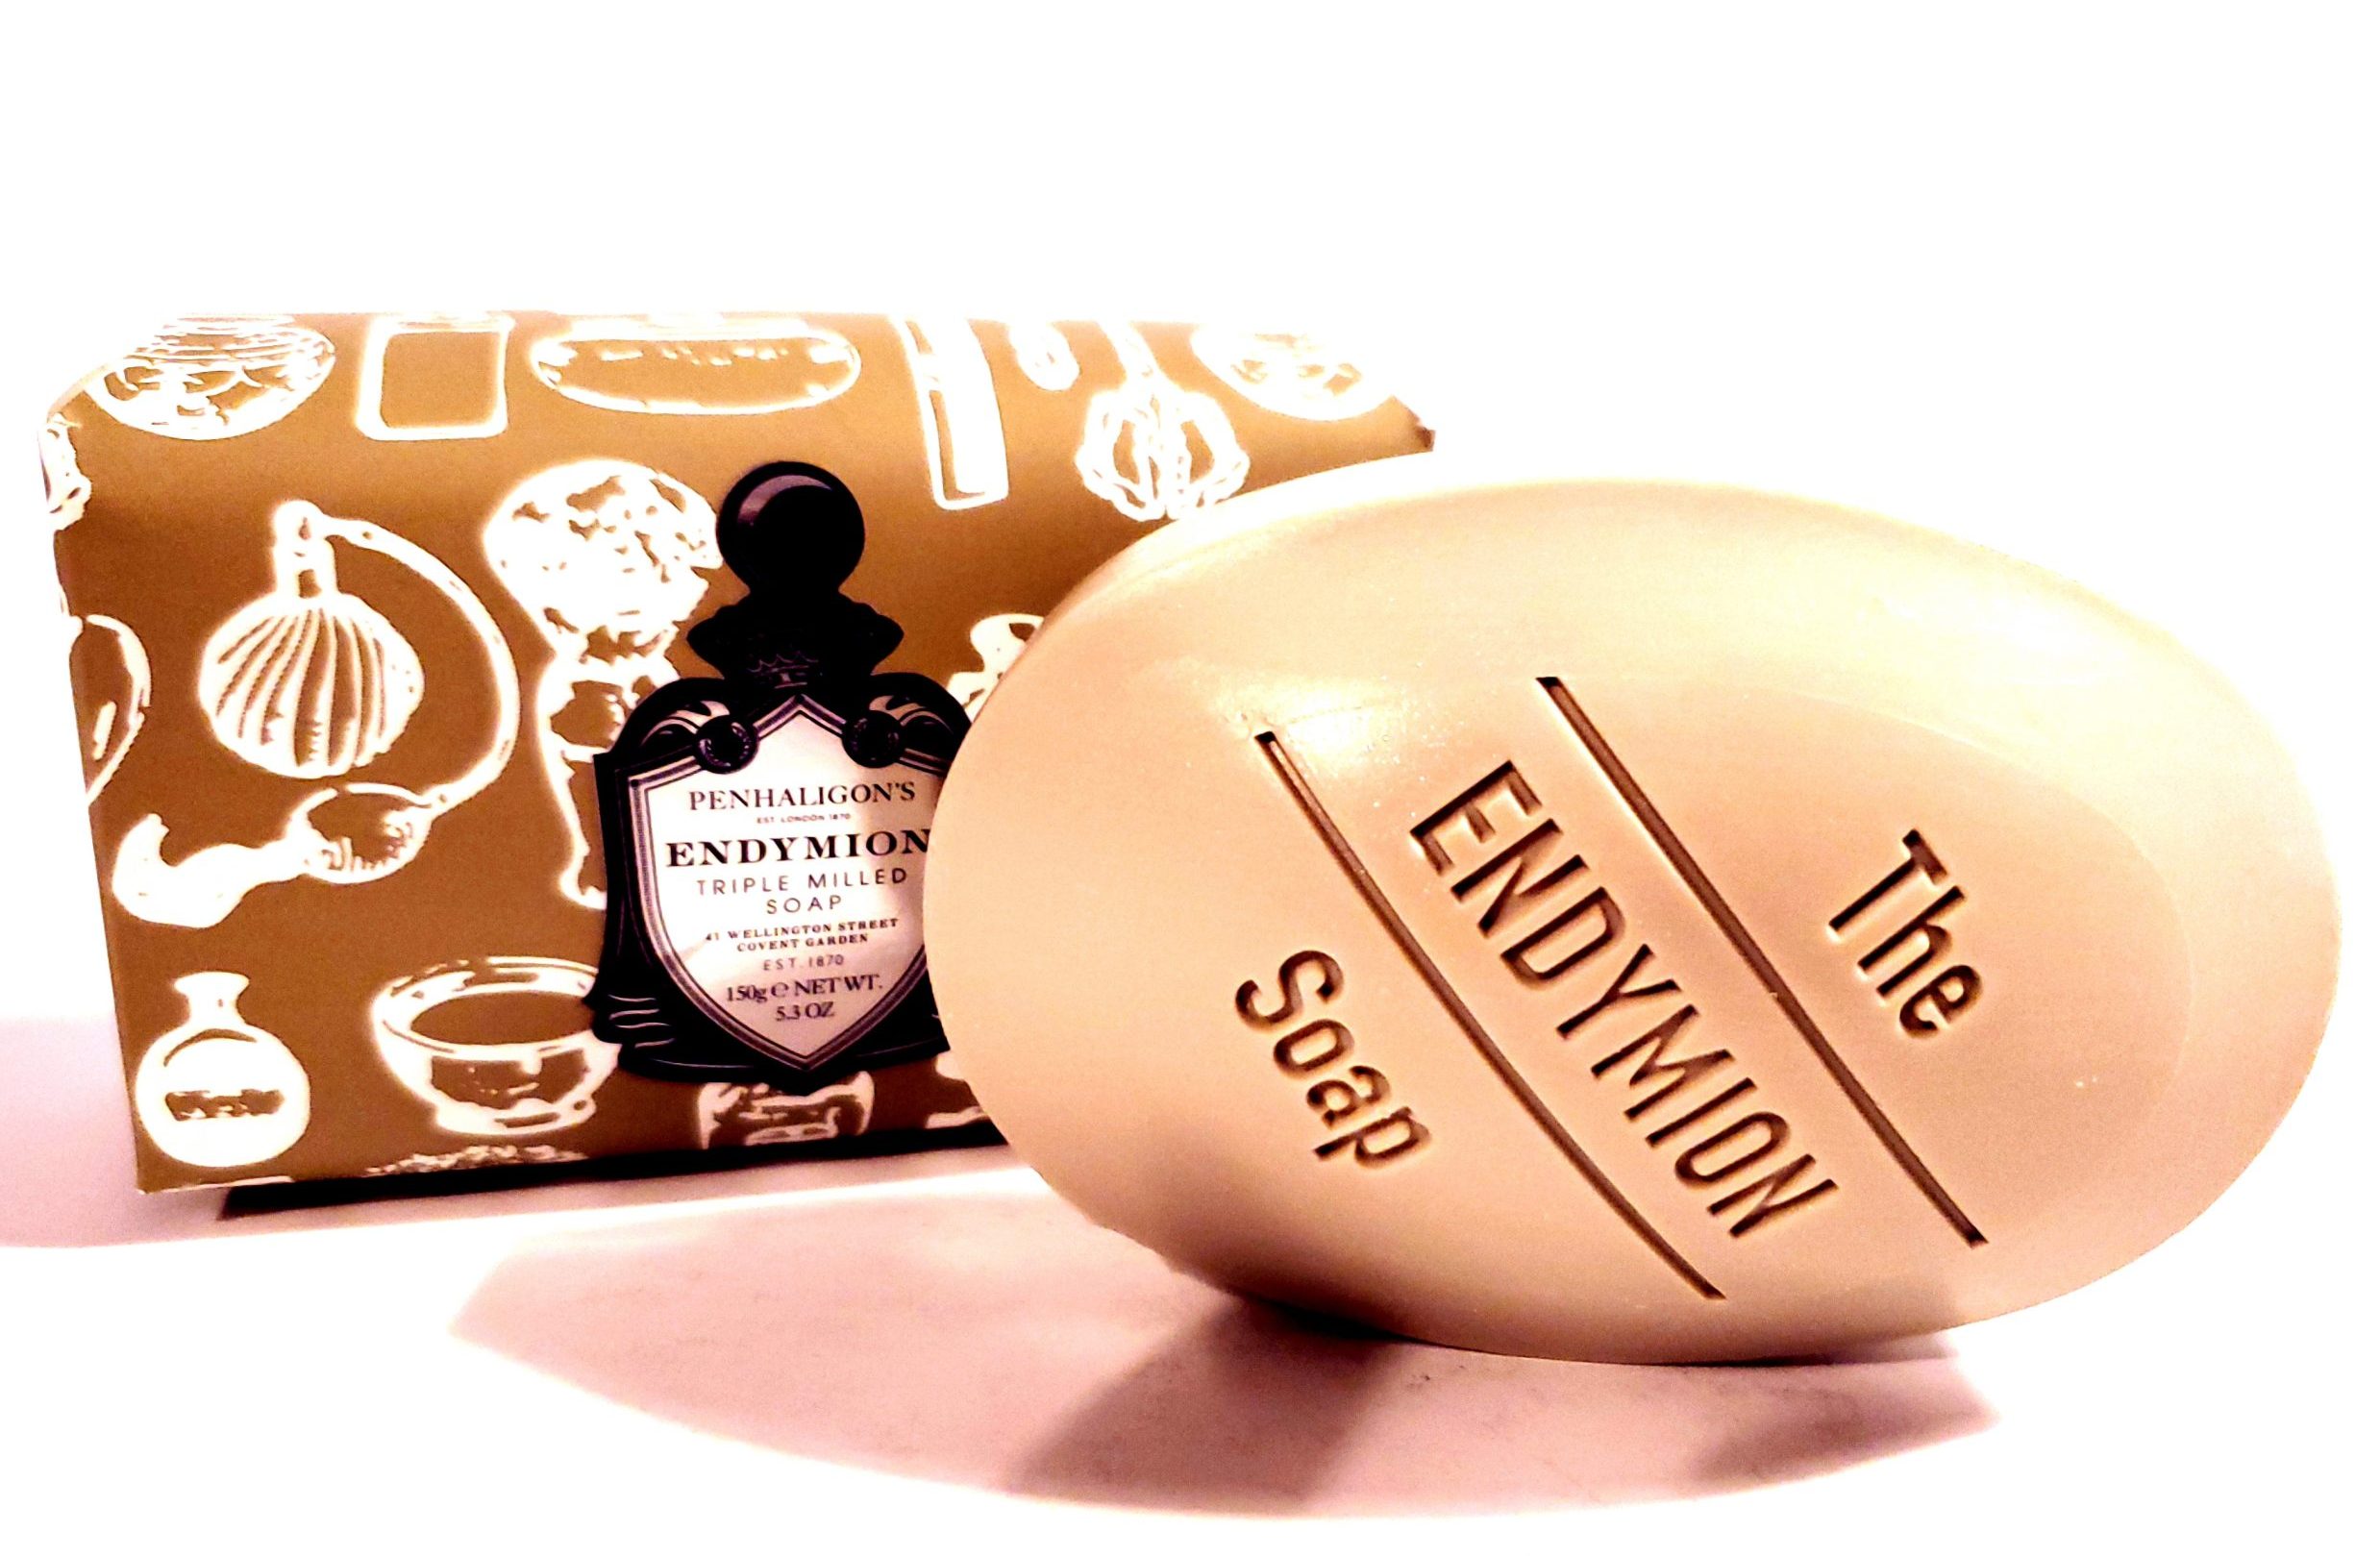 A Penhaligon's Endymion Triple Milled Soap 150g bar with a box next to it.